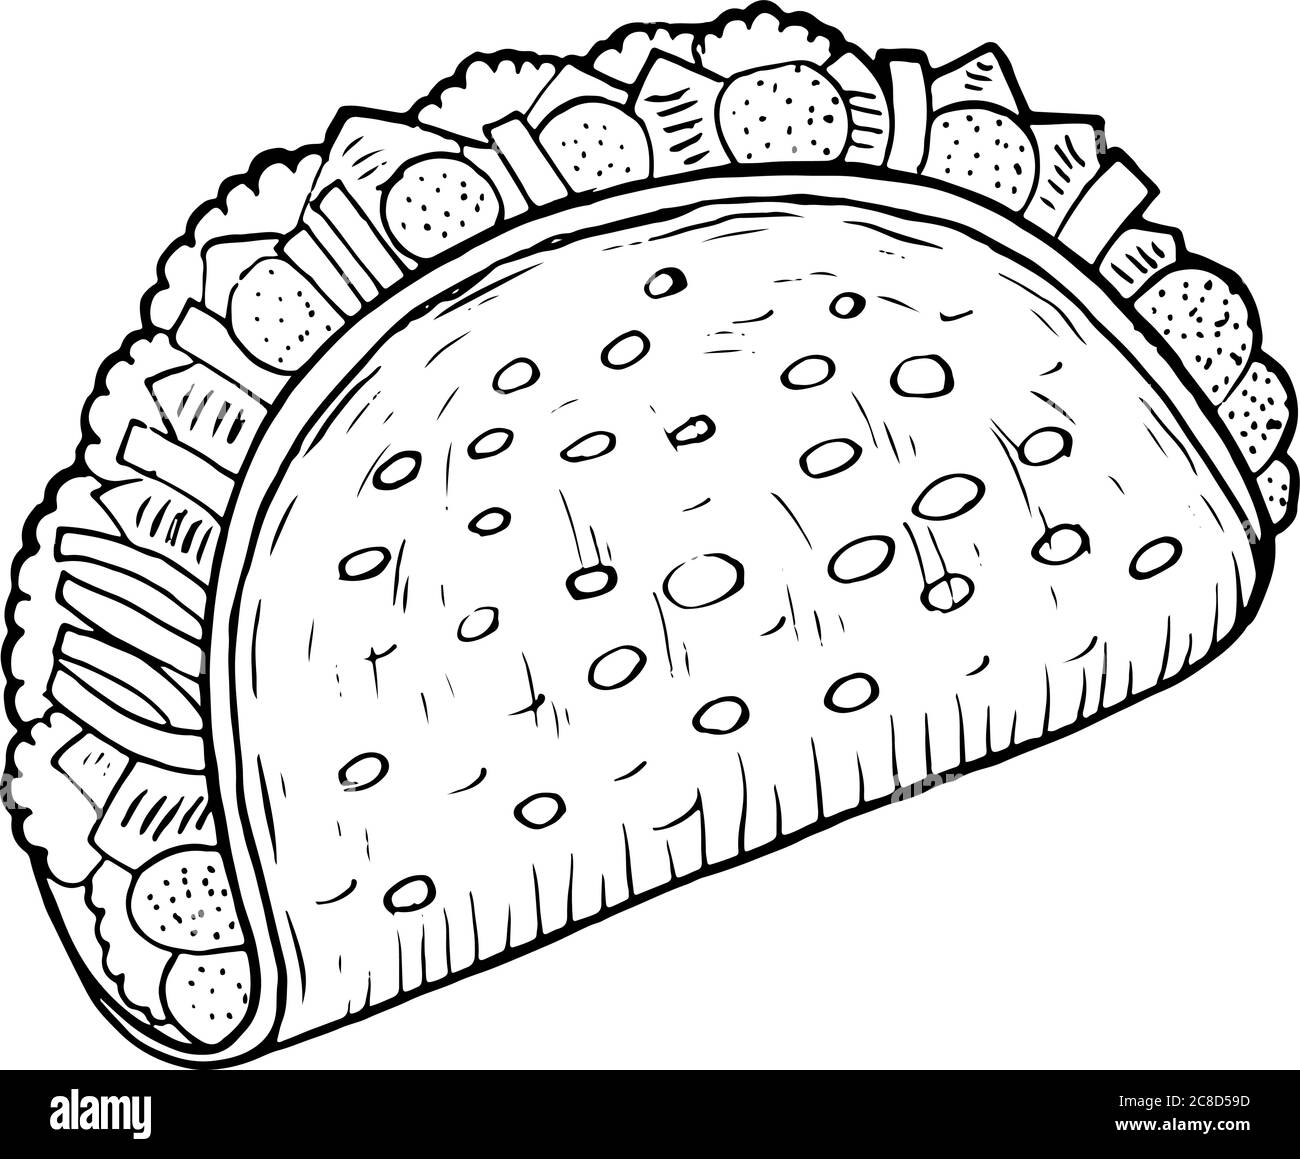 Mexican food taco - coloring page for adults. Ink artwork. Graphic doodle cartoon art. Vector illustration Stock Vector